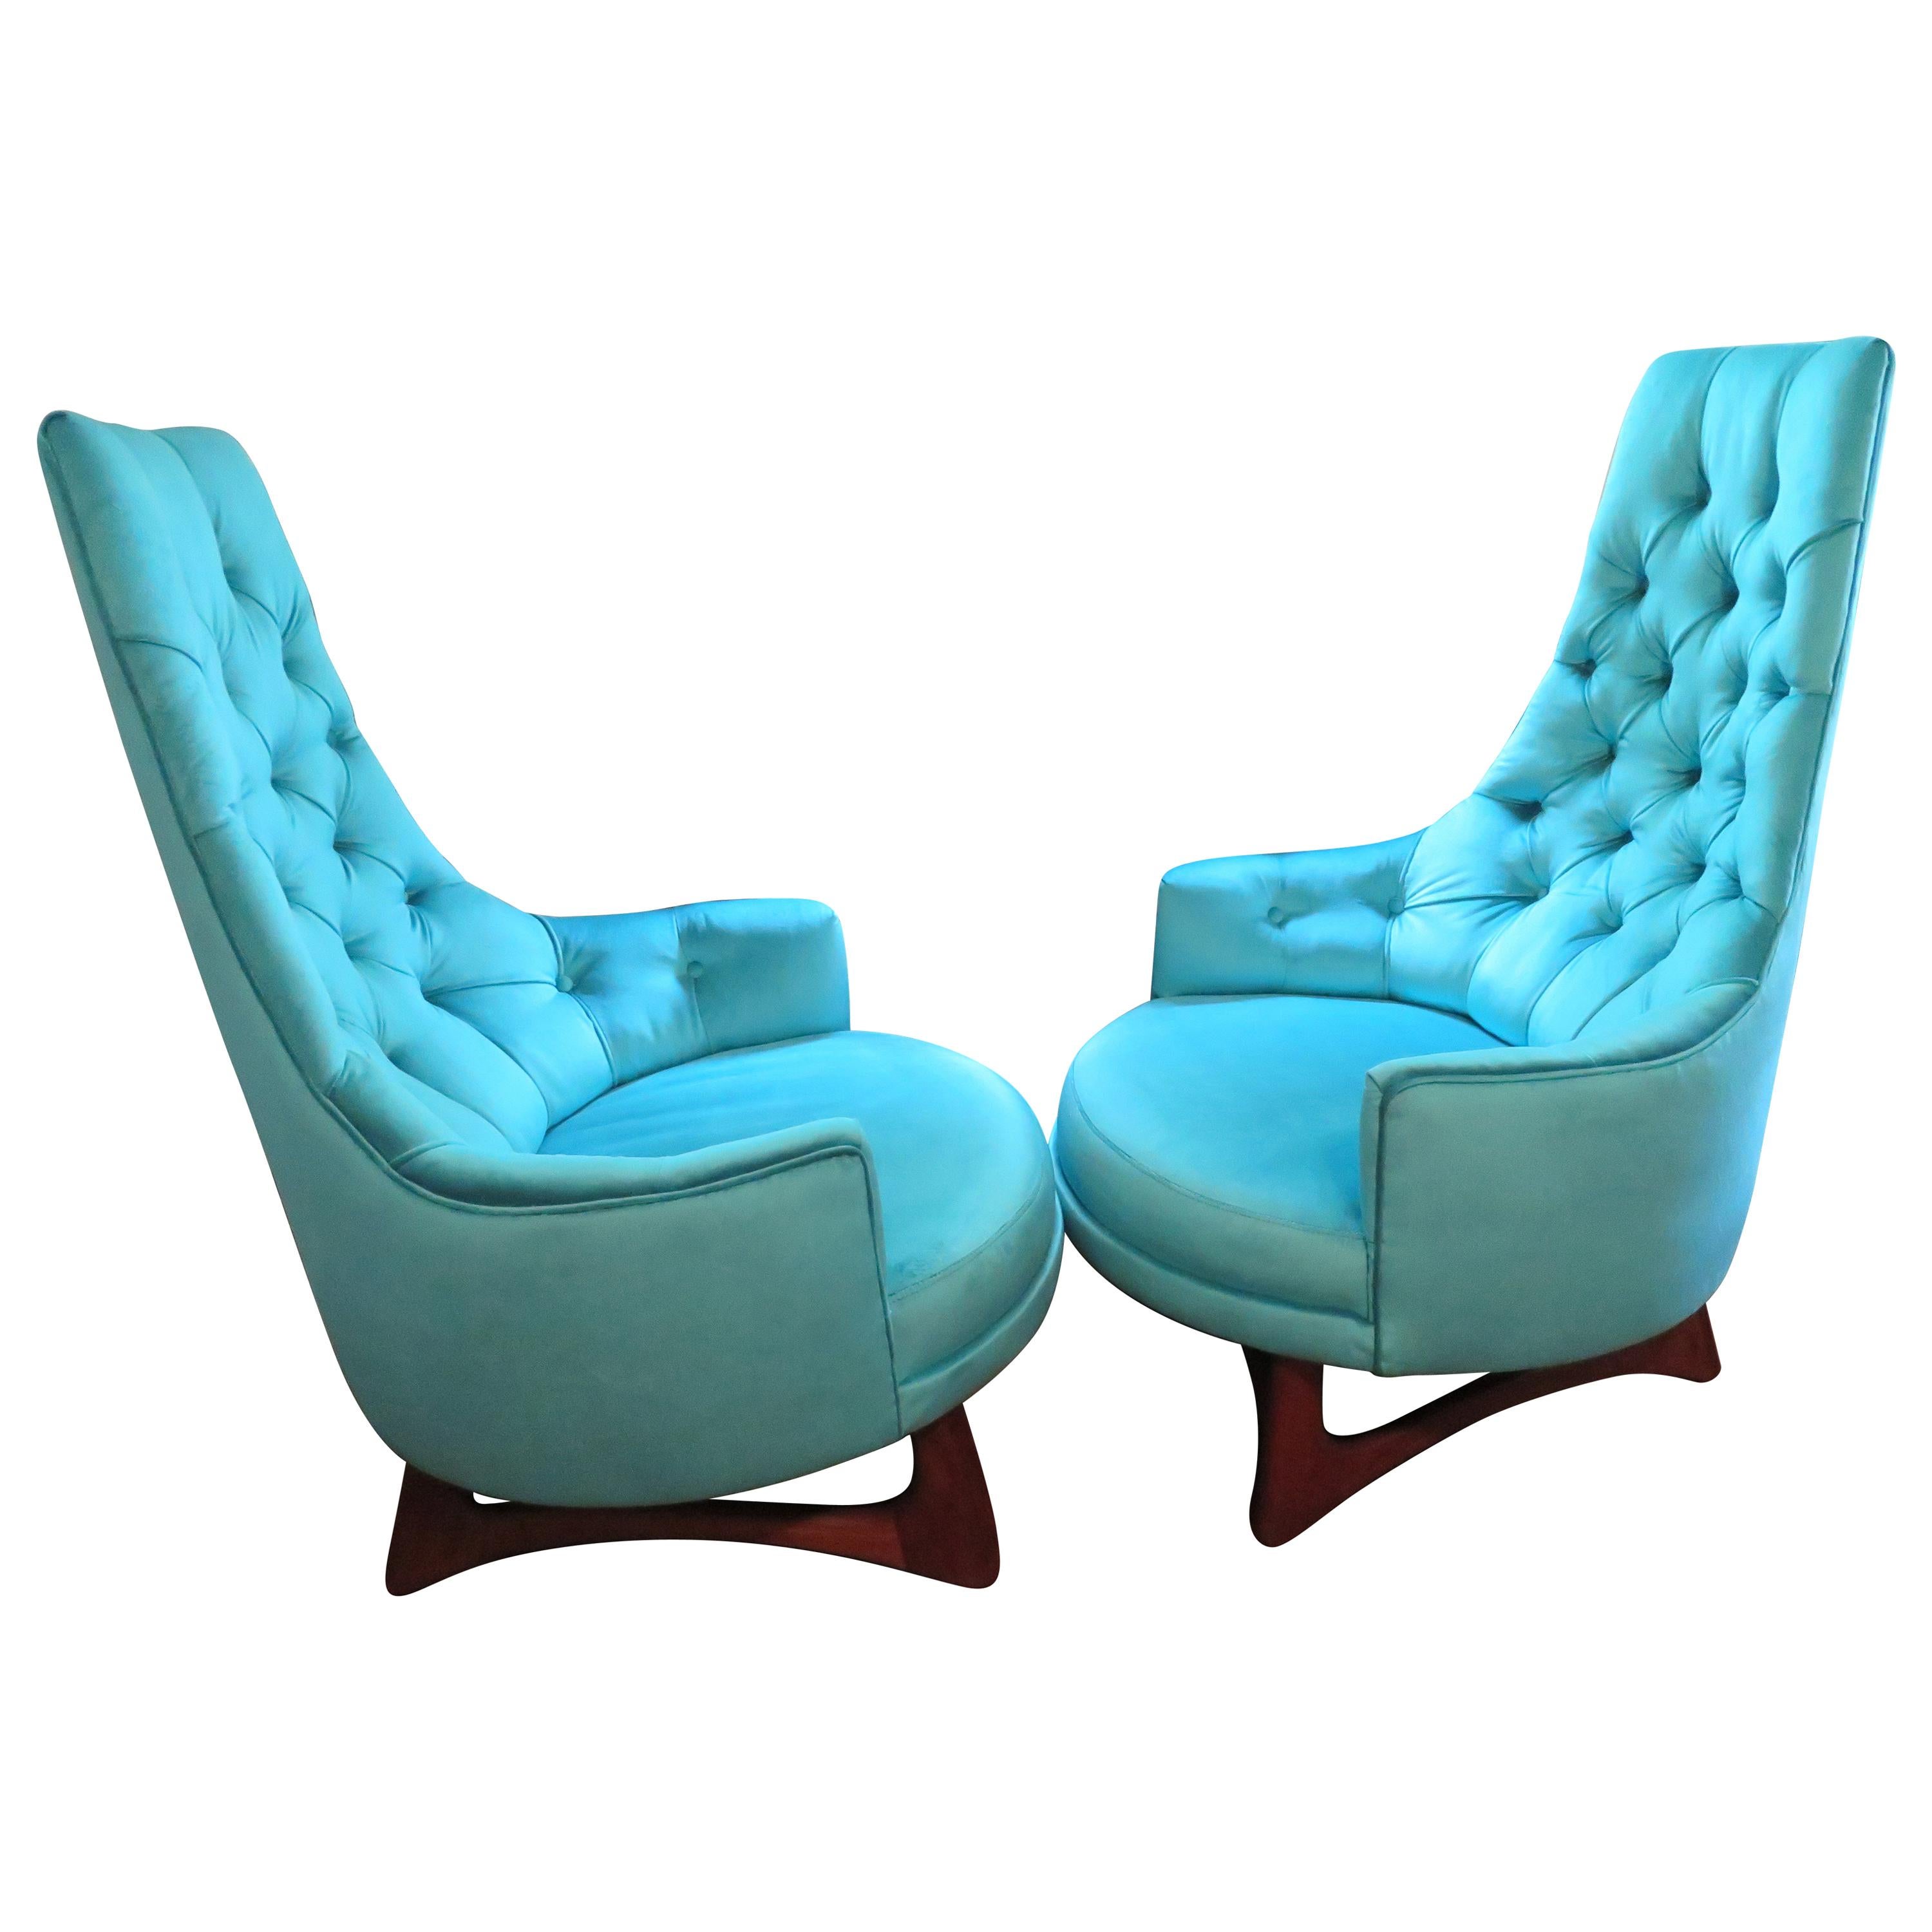 Pair of Adrian Pearsall Tall Back Tufted Sculpted Walnut Base Lounge Chair For Sale